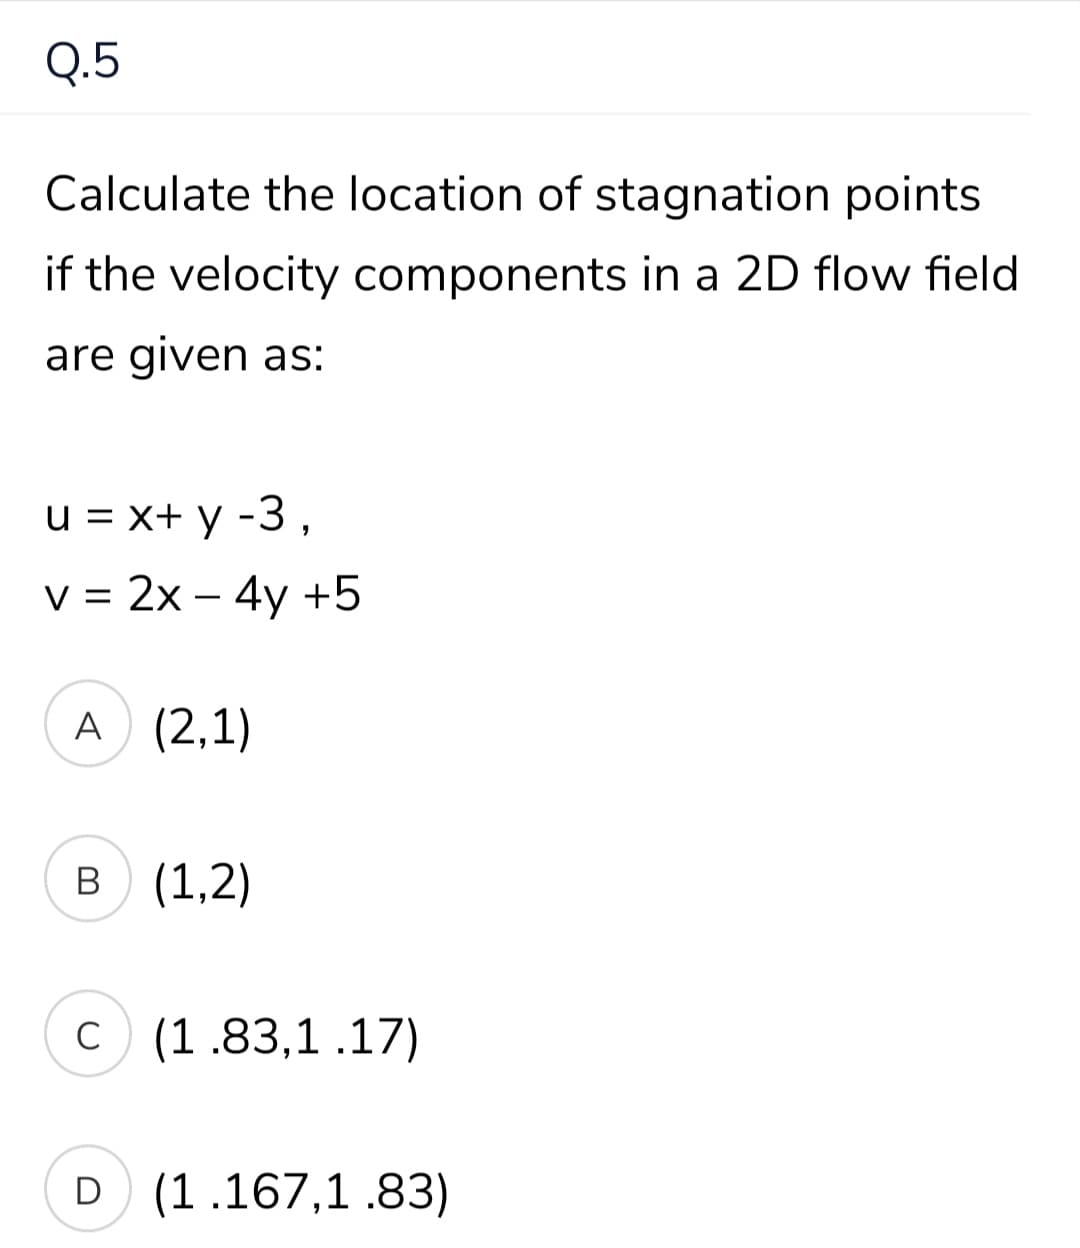 Q.5
Calculate the location of stagnation points
if the velocity components in a 2D flow field
are given as:
u = x+ y -3,
v = 2x – 4y +5
A (2,1)
B (1,2)
C
C (1.83,1 .17)
D (1.167,1 .83)
